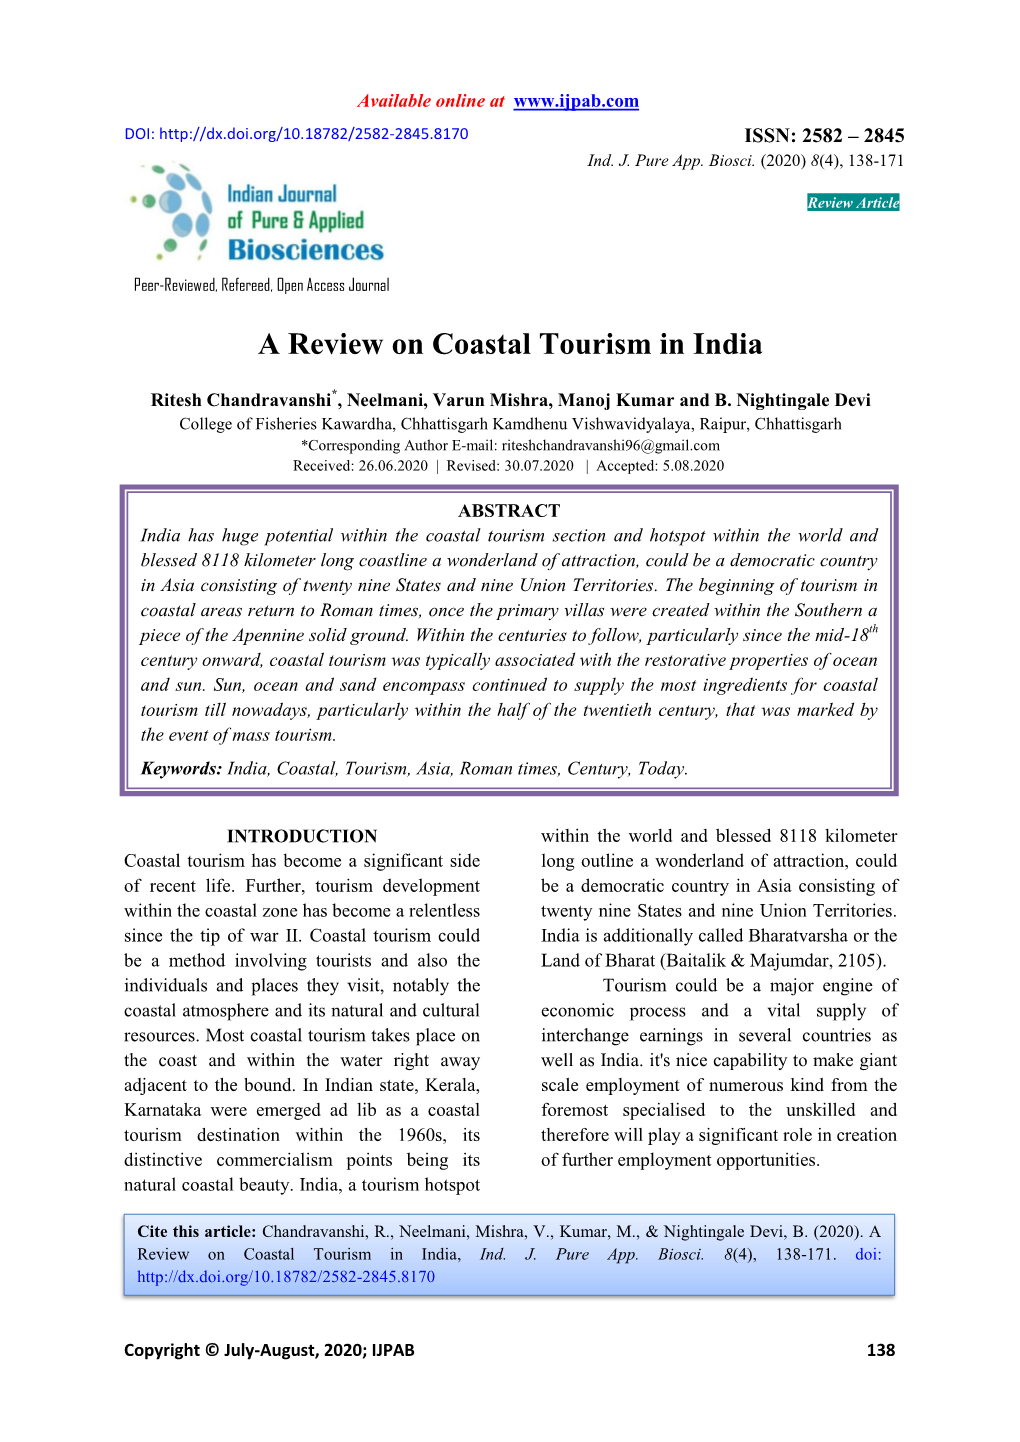 A Review on Coastal Tourism in India